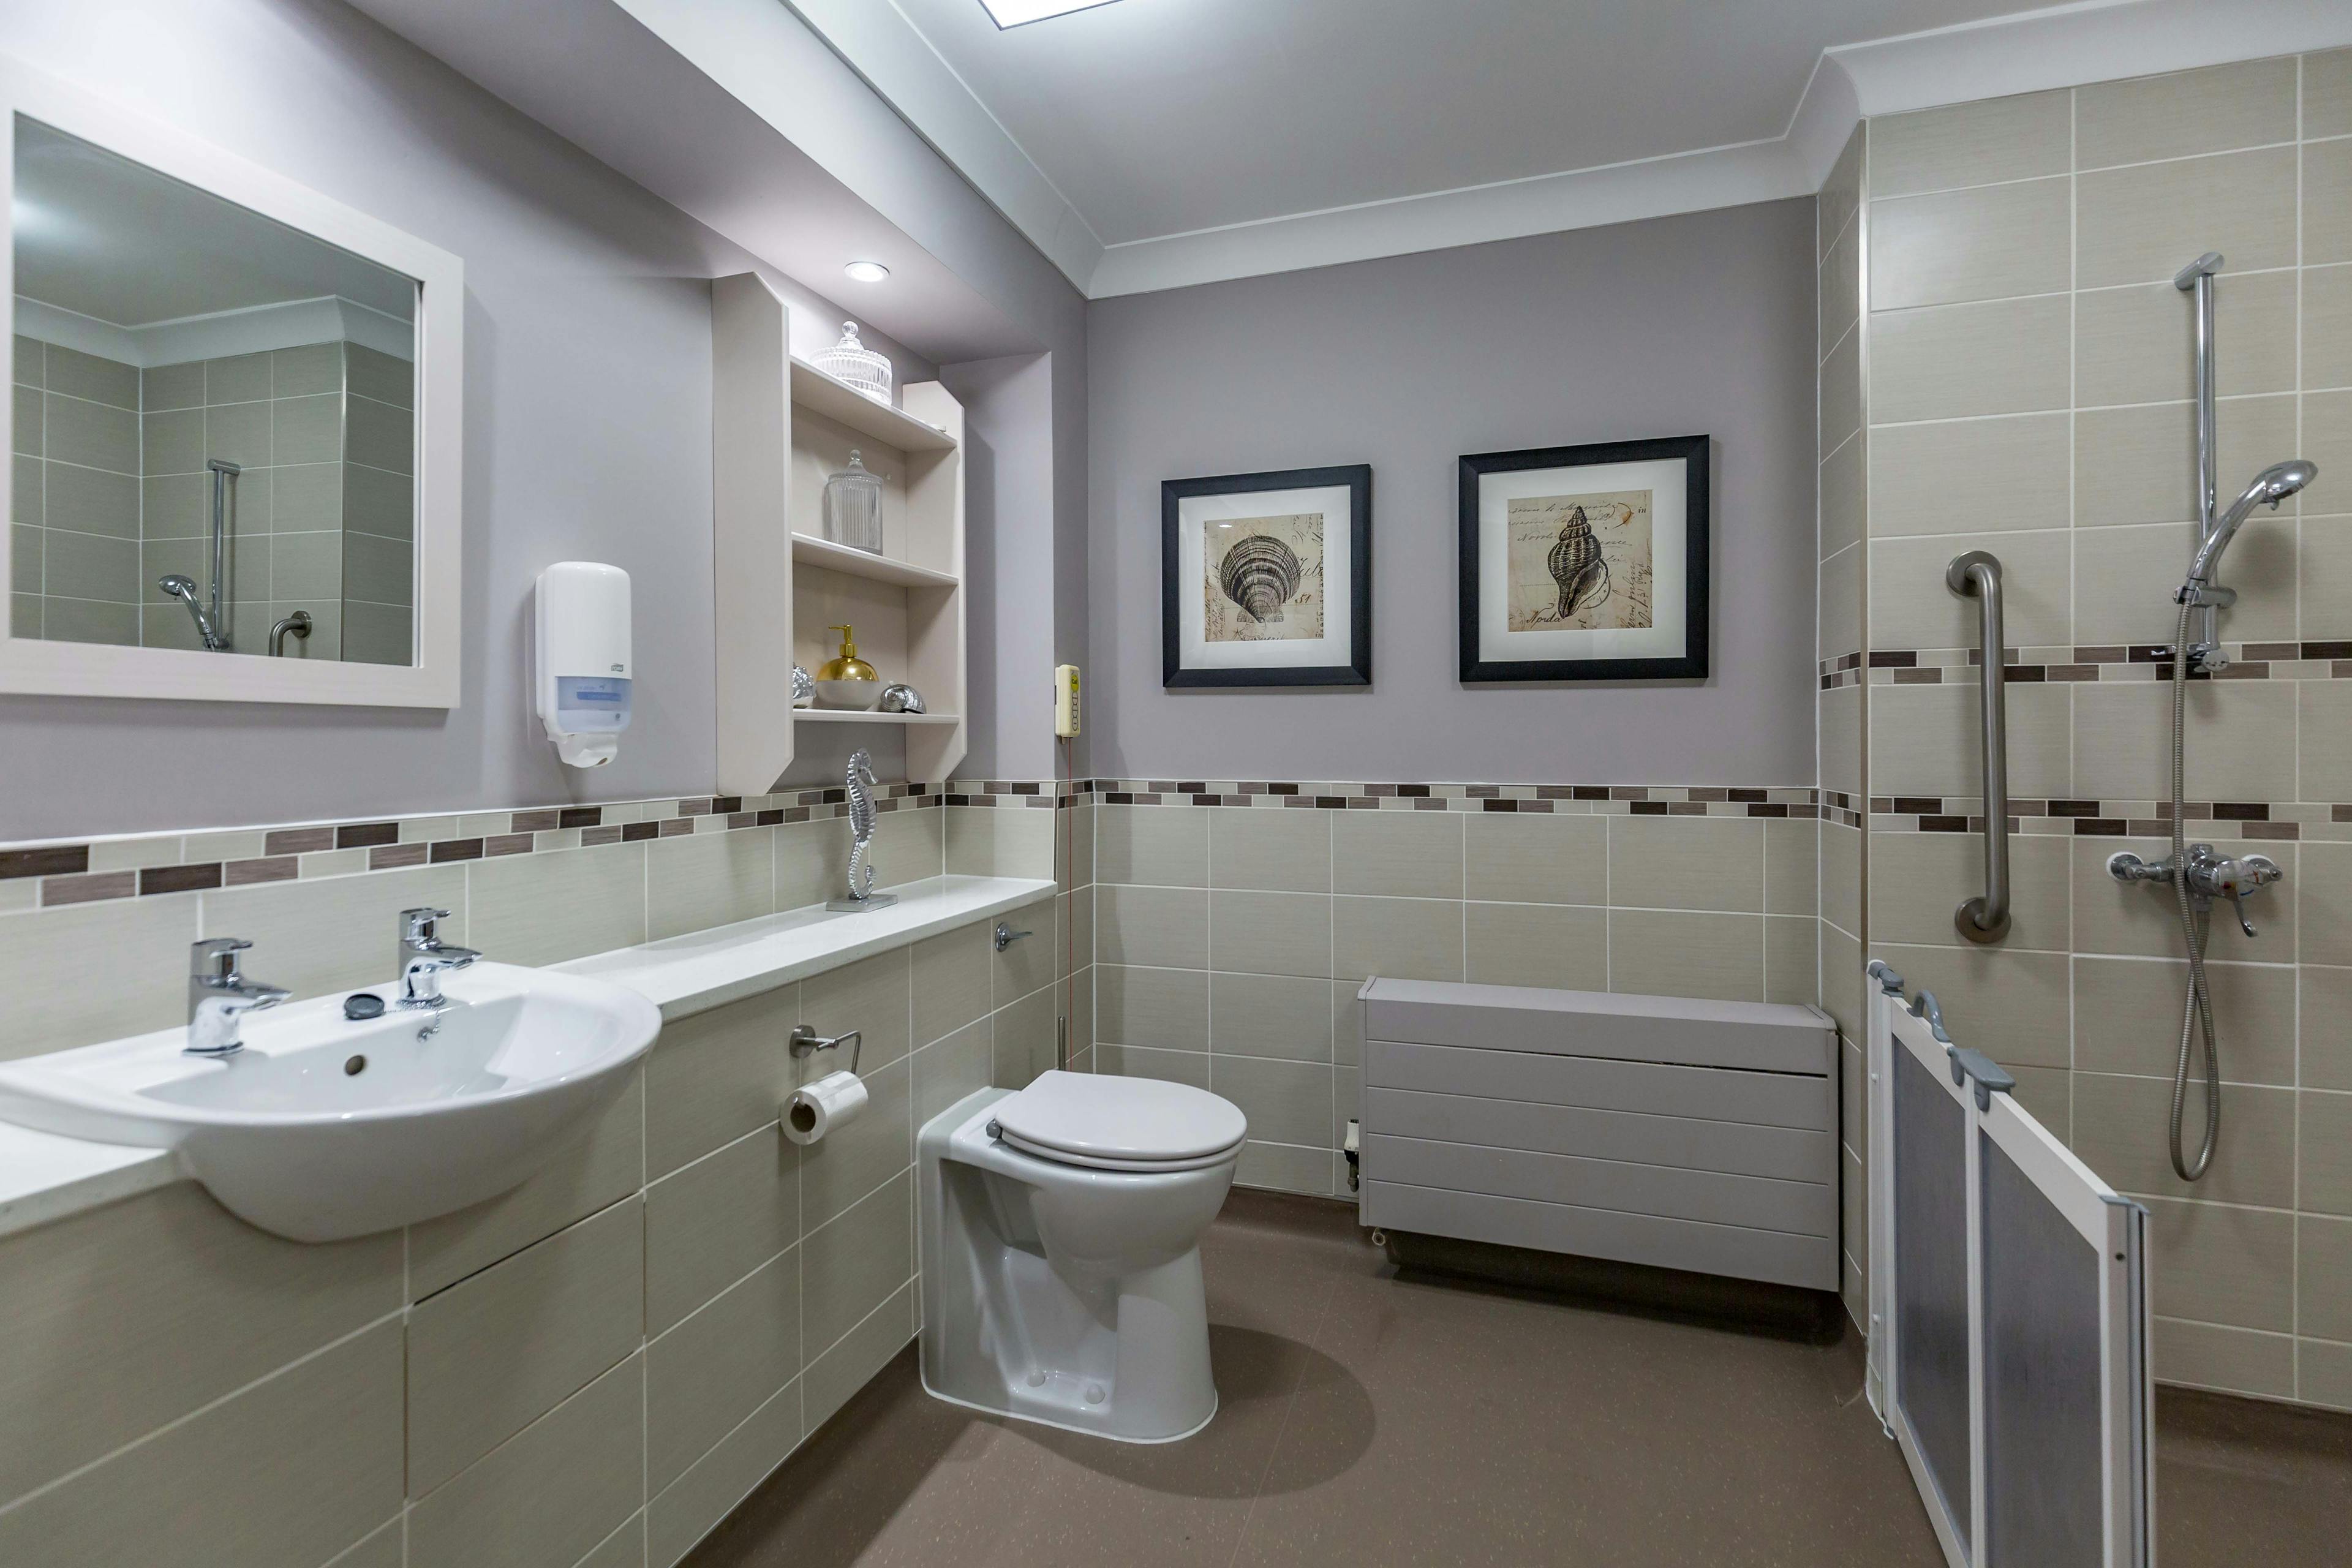 Bathroom at Southgate Beaumont Care Home in London, England